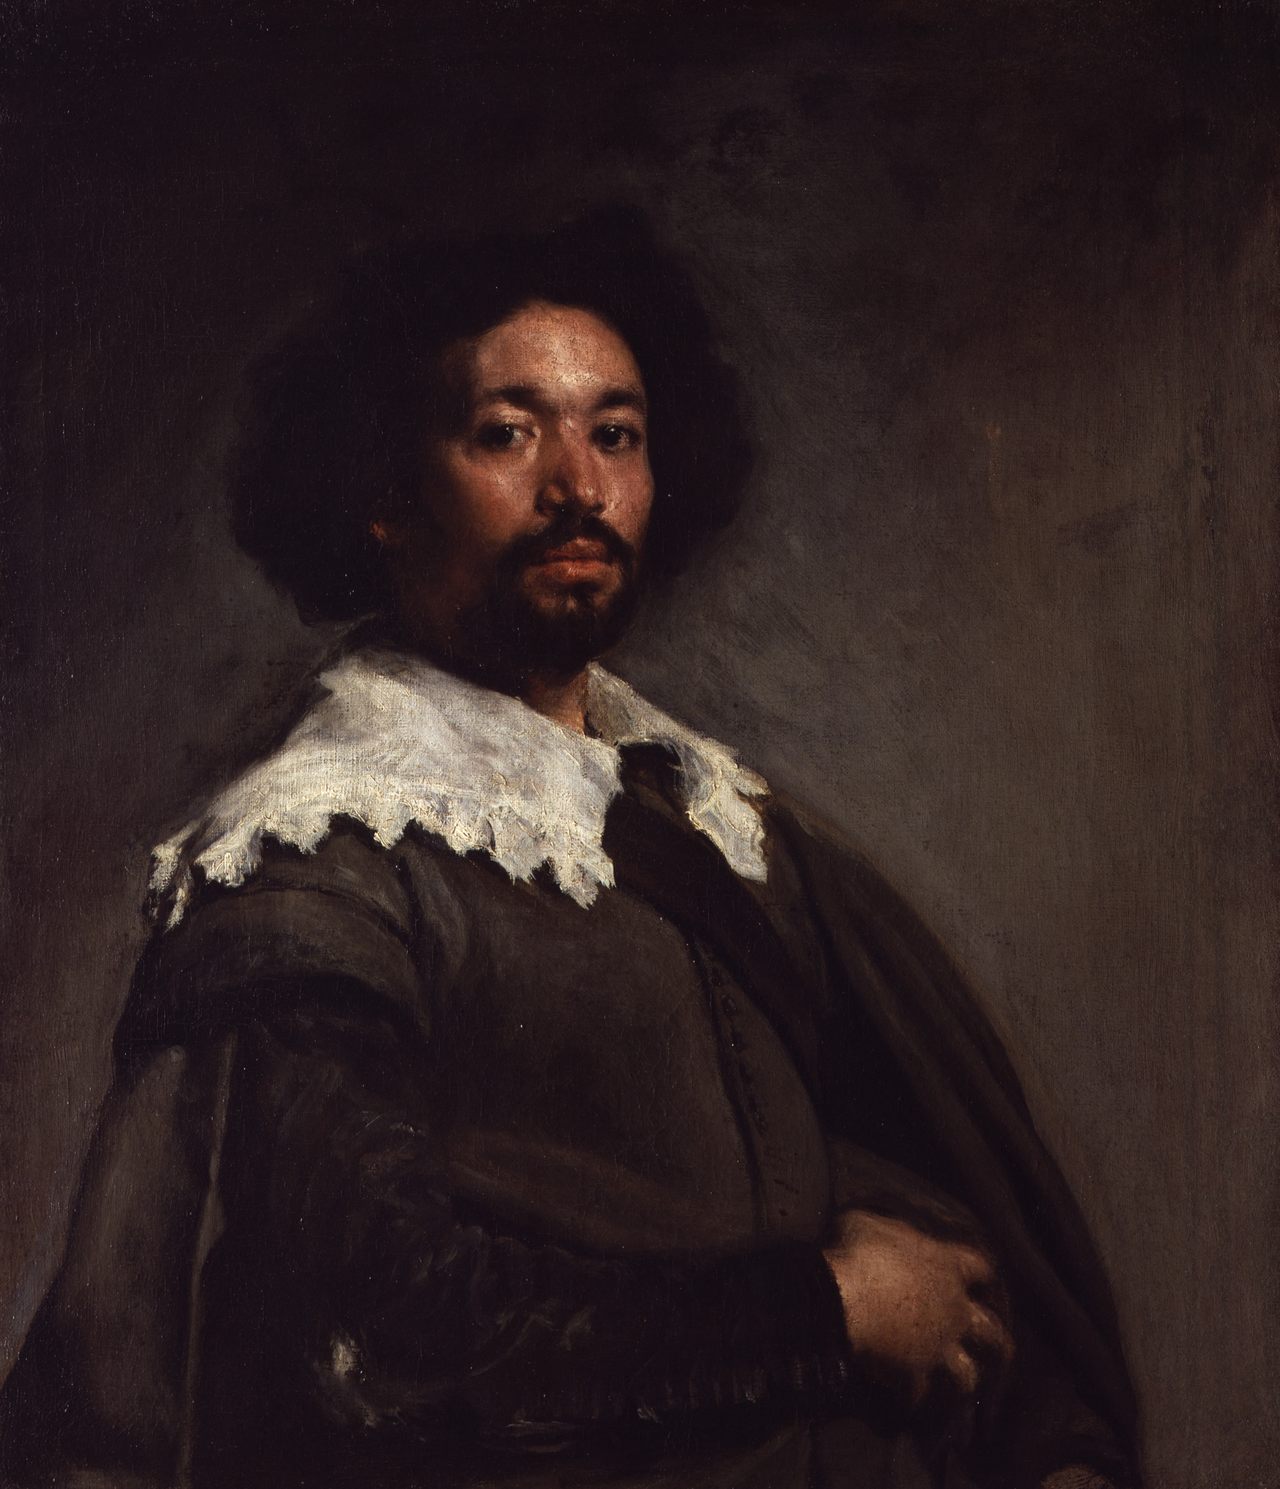 Juan de Pareja, as painted in 1650 by Spanish artist Diego Velázquez, the man who enslaved him.